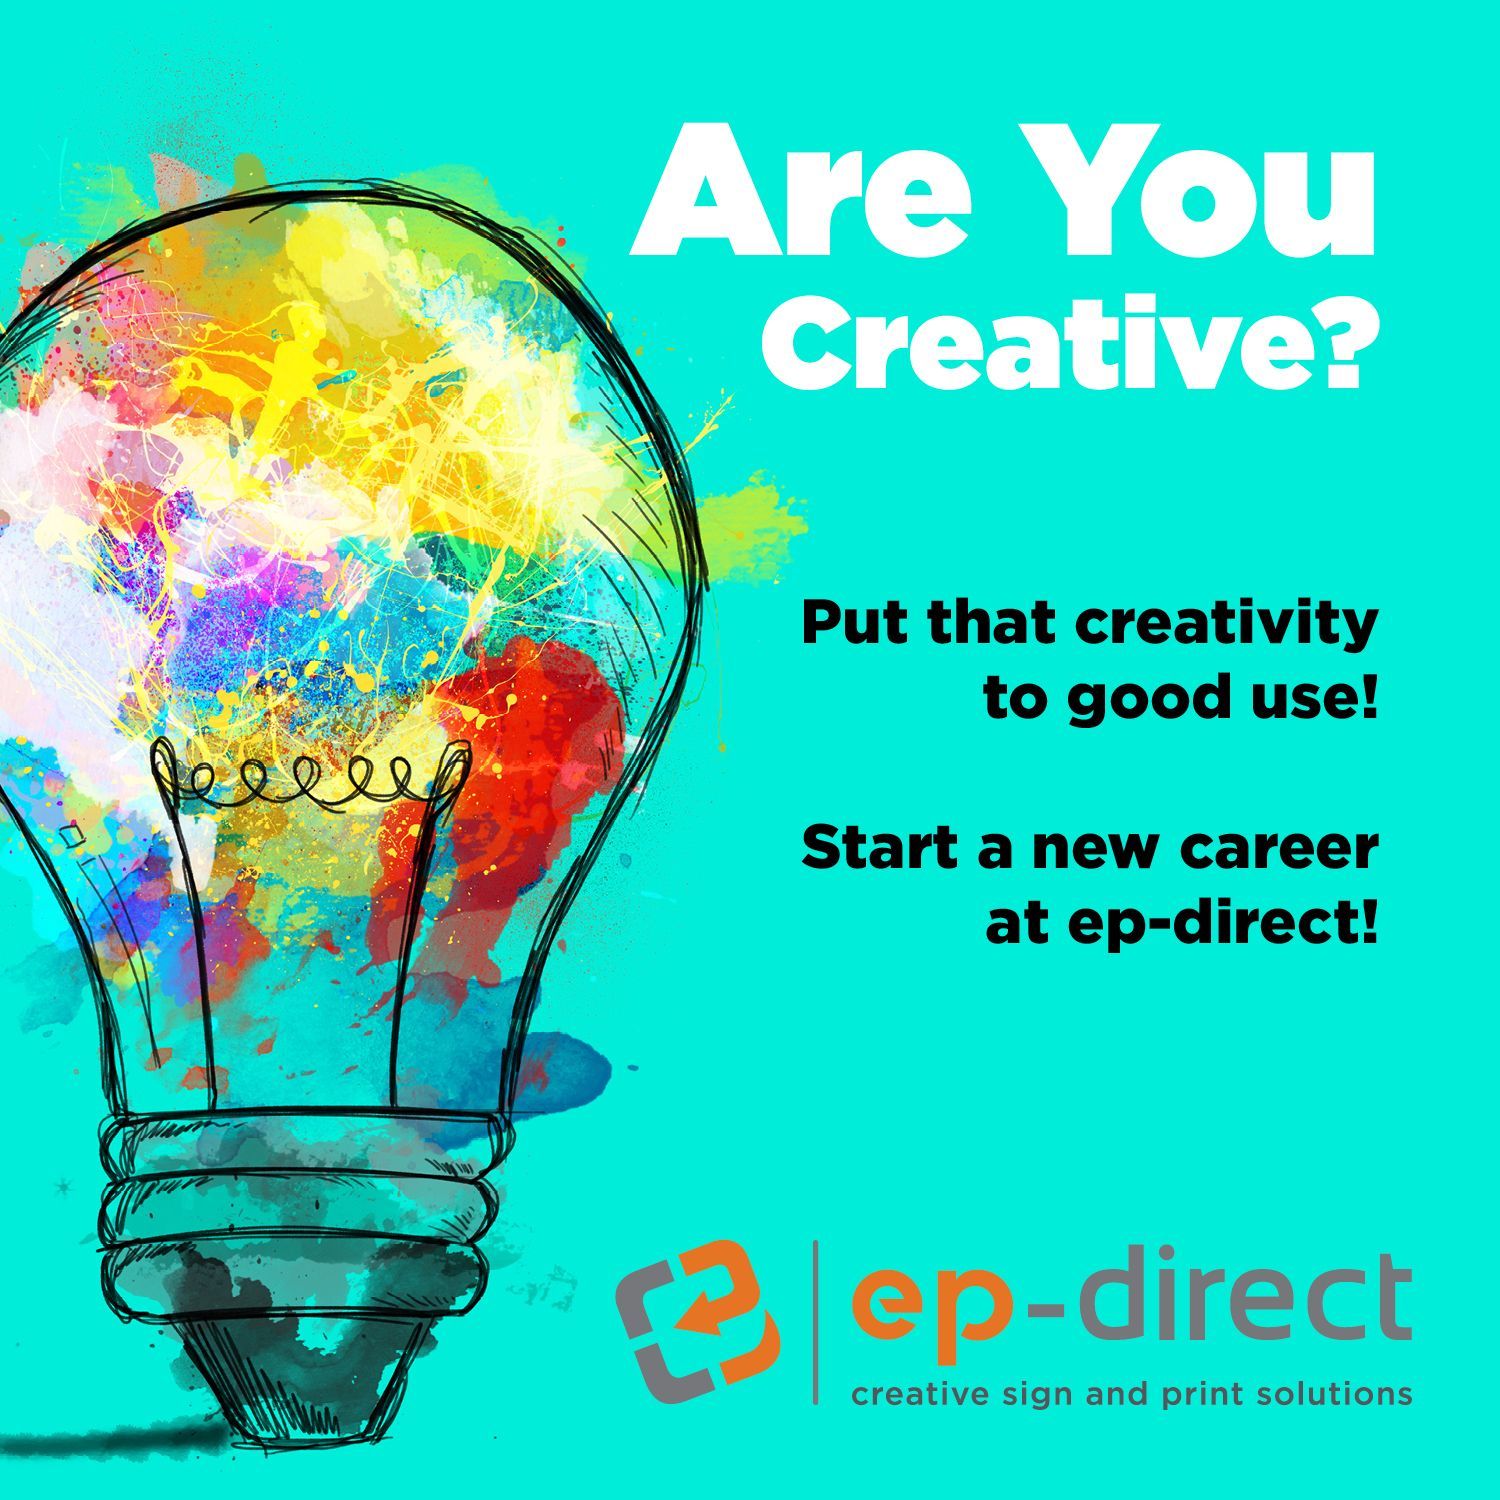 Are You Creative?